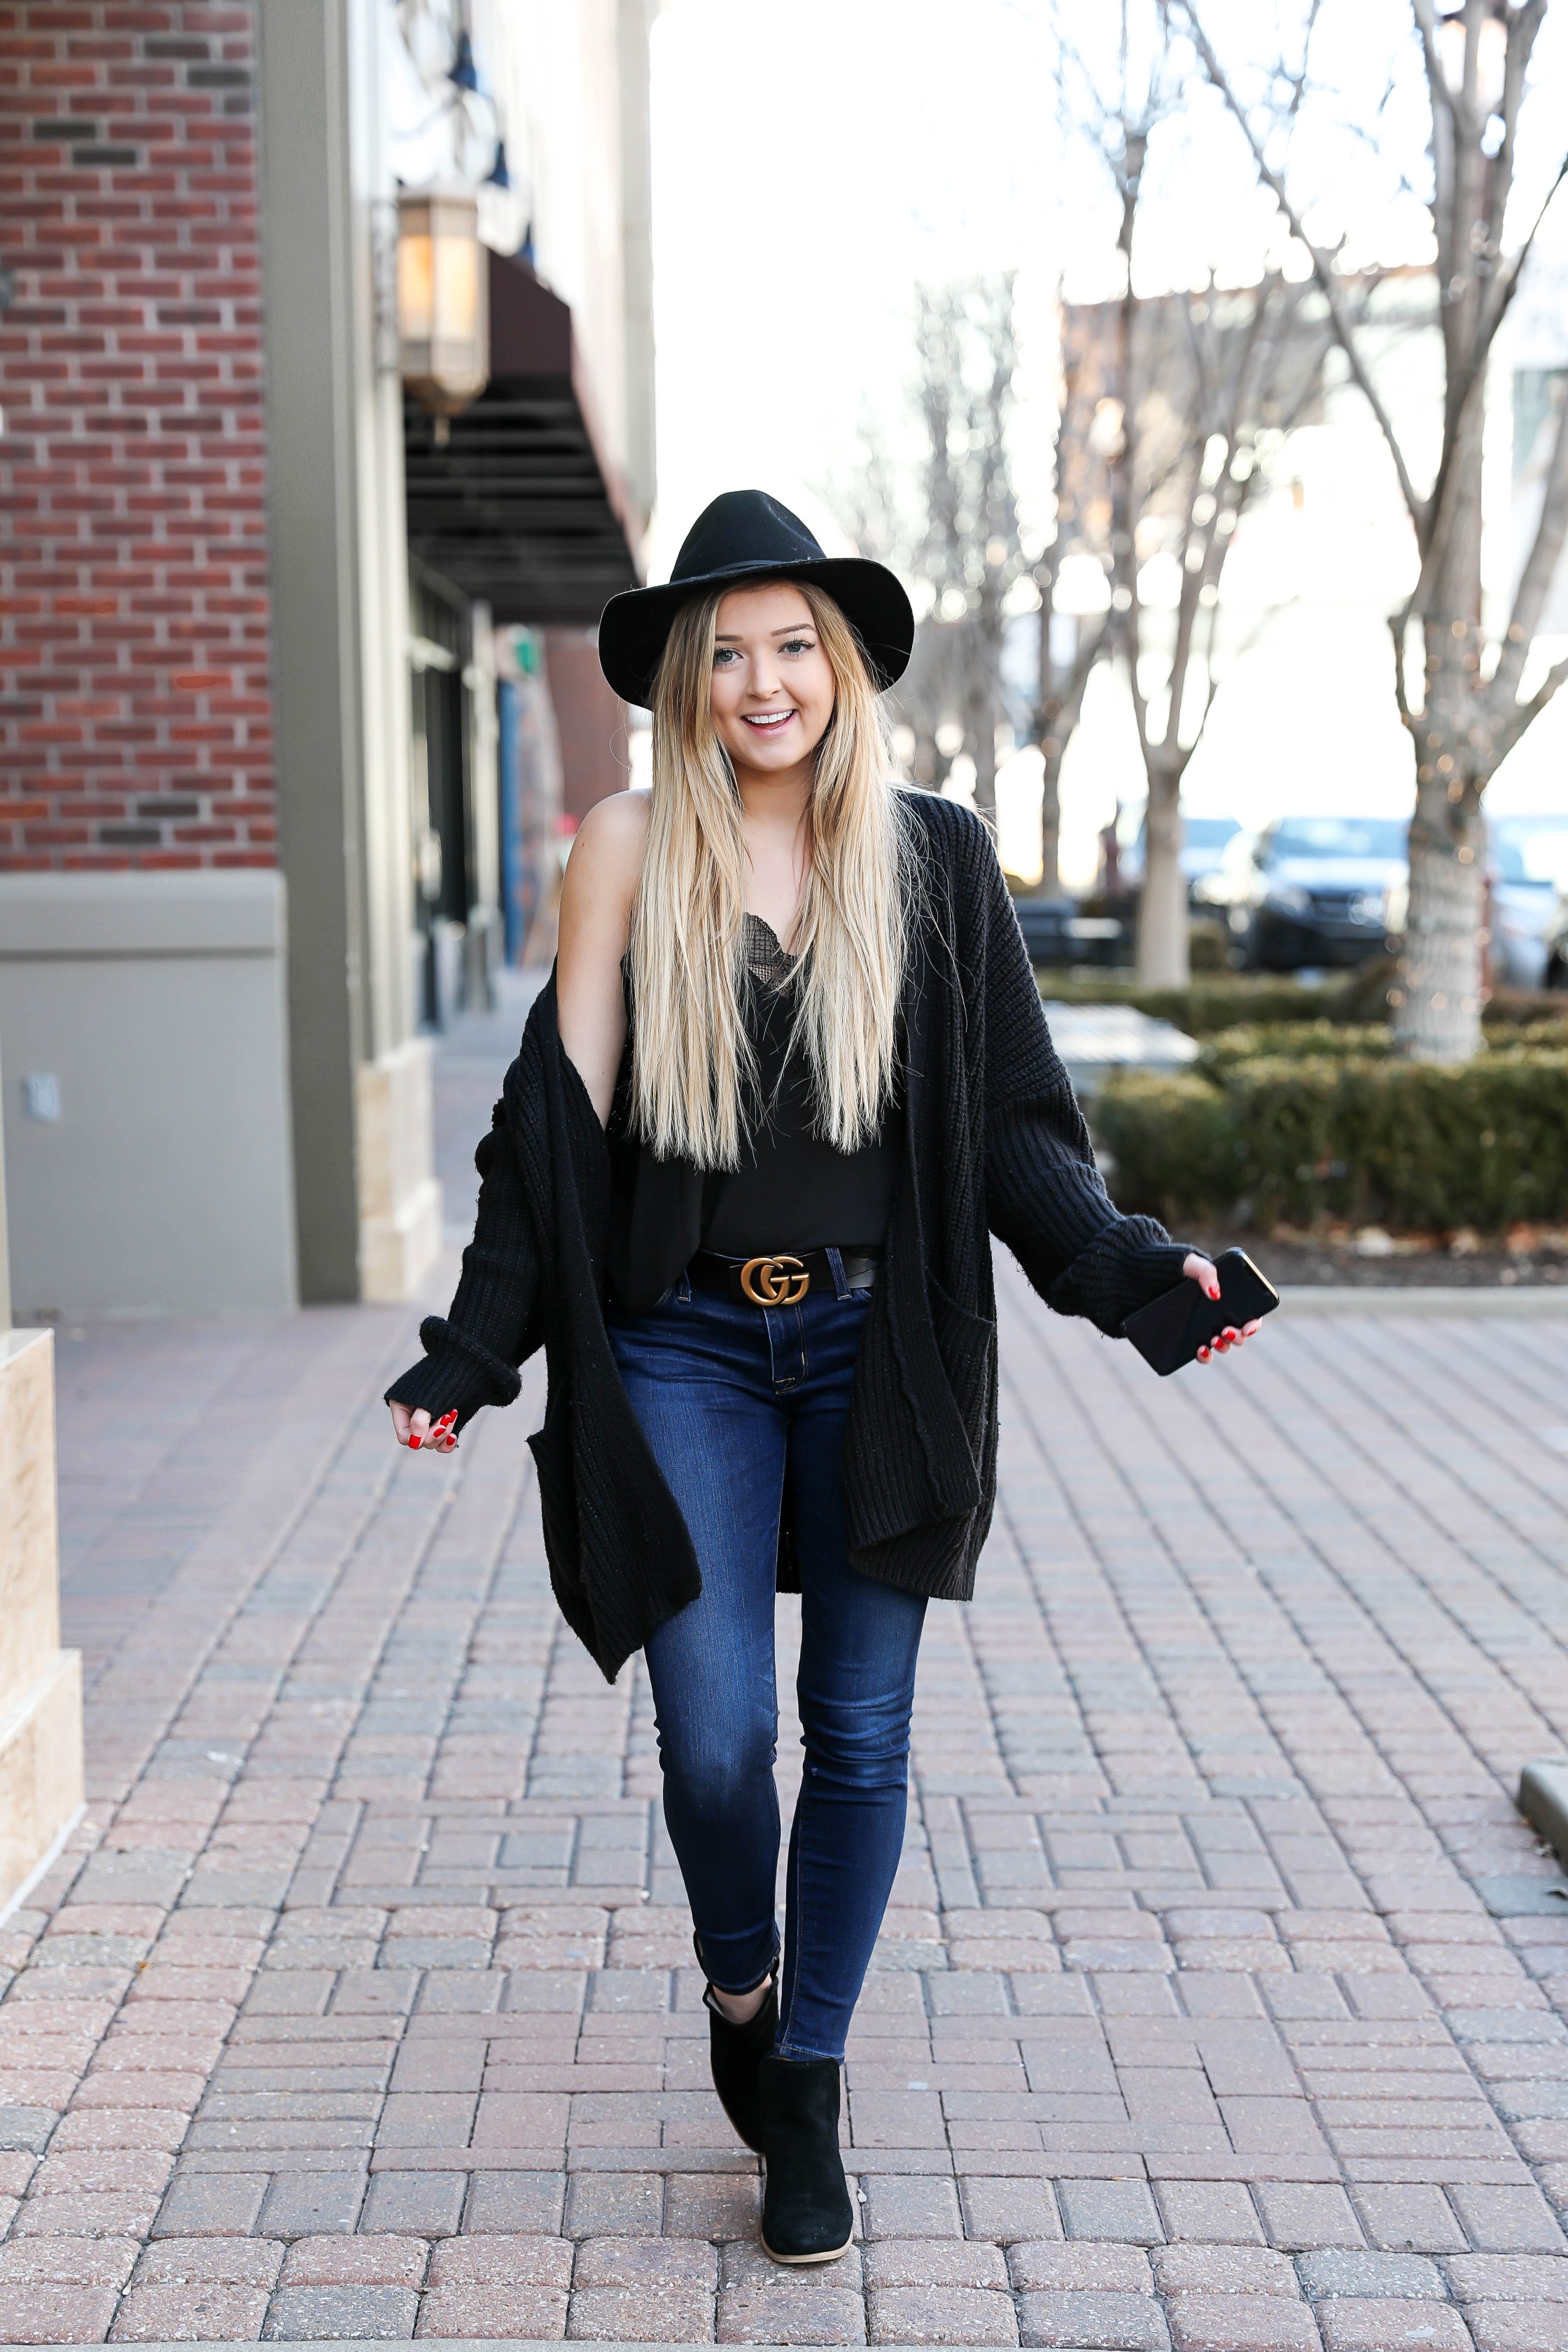 How I plan my day on the iPhone iCalendar app! Start the new year off right with these organization tips! Also checkout this cute all black outfit with this cute gucci belt and black felt hat! Details on fashion blog daily dose of charm by lauren lindmark